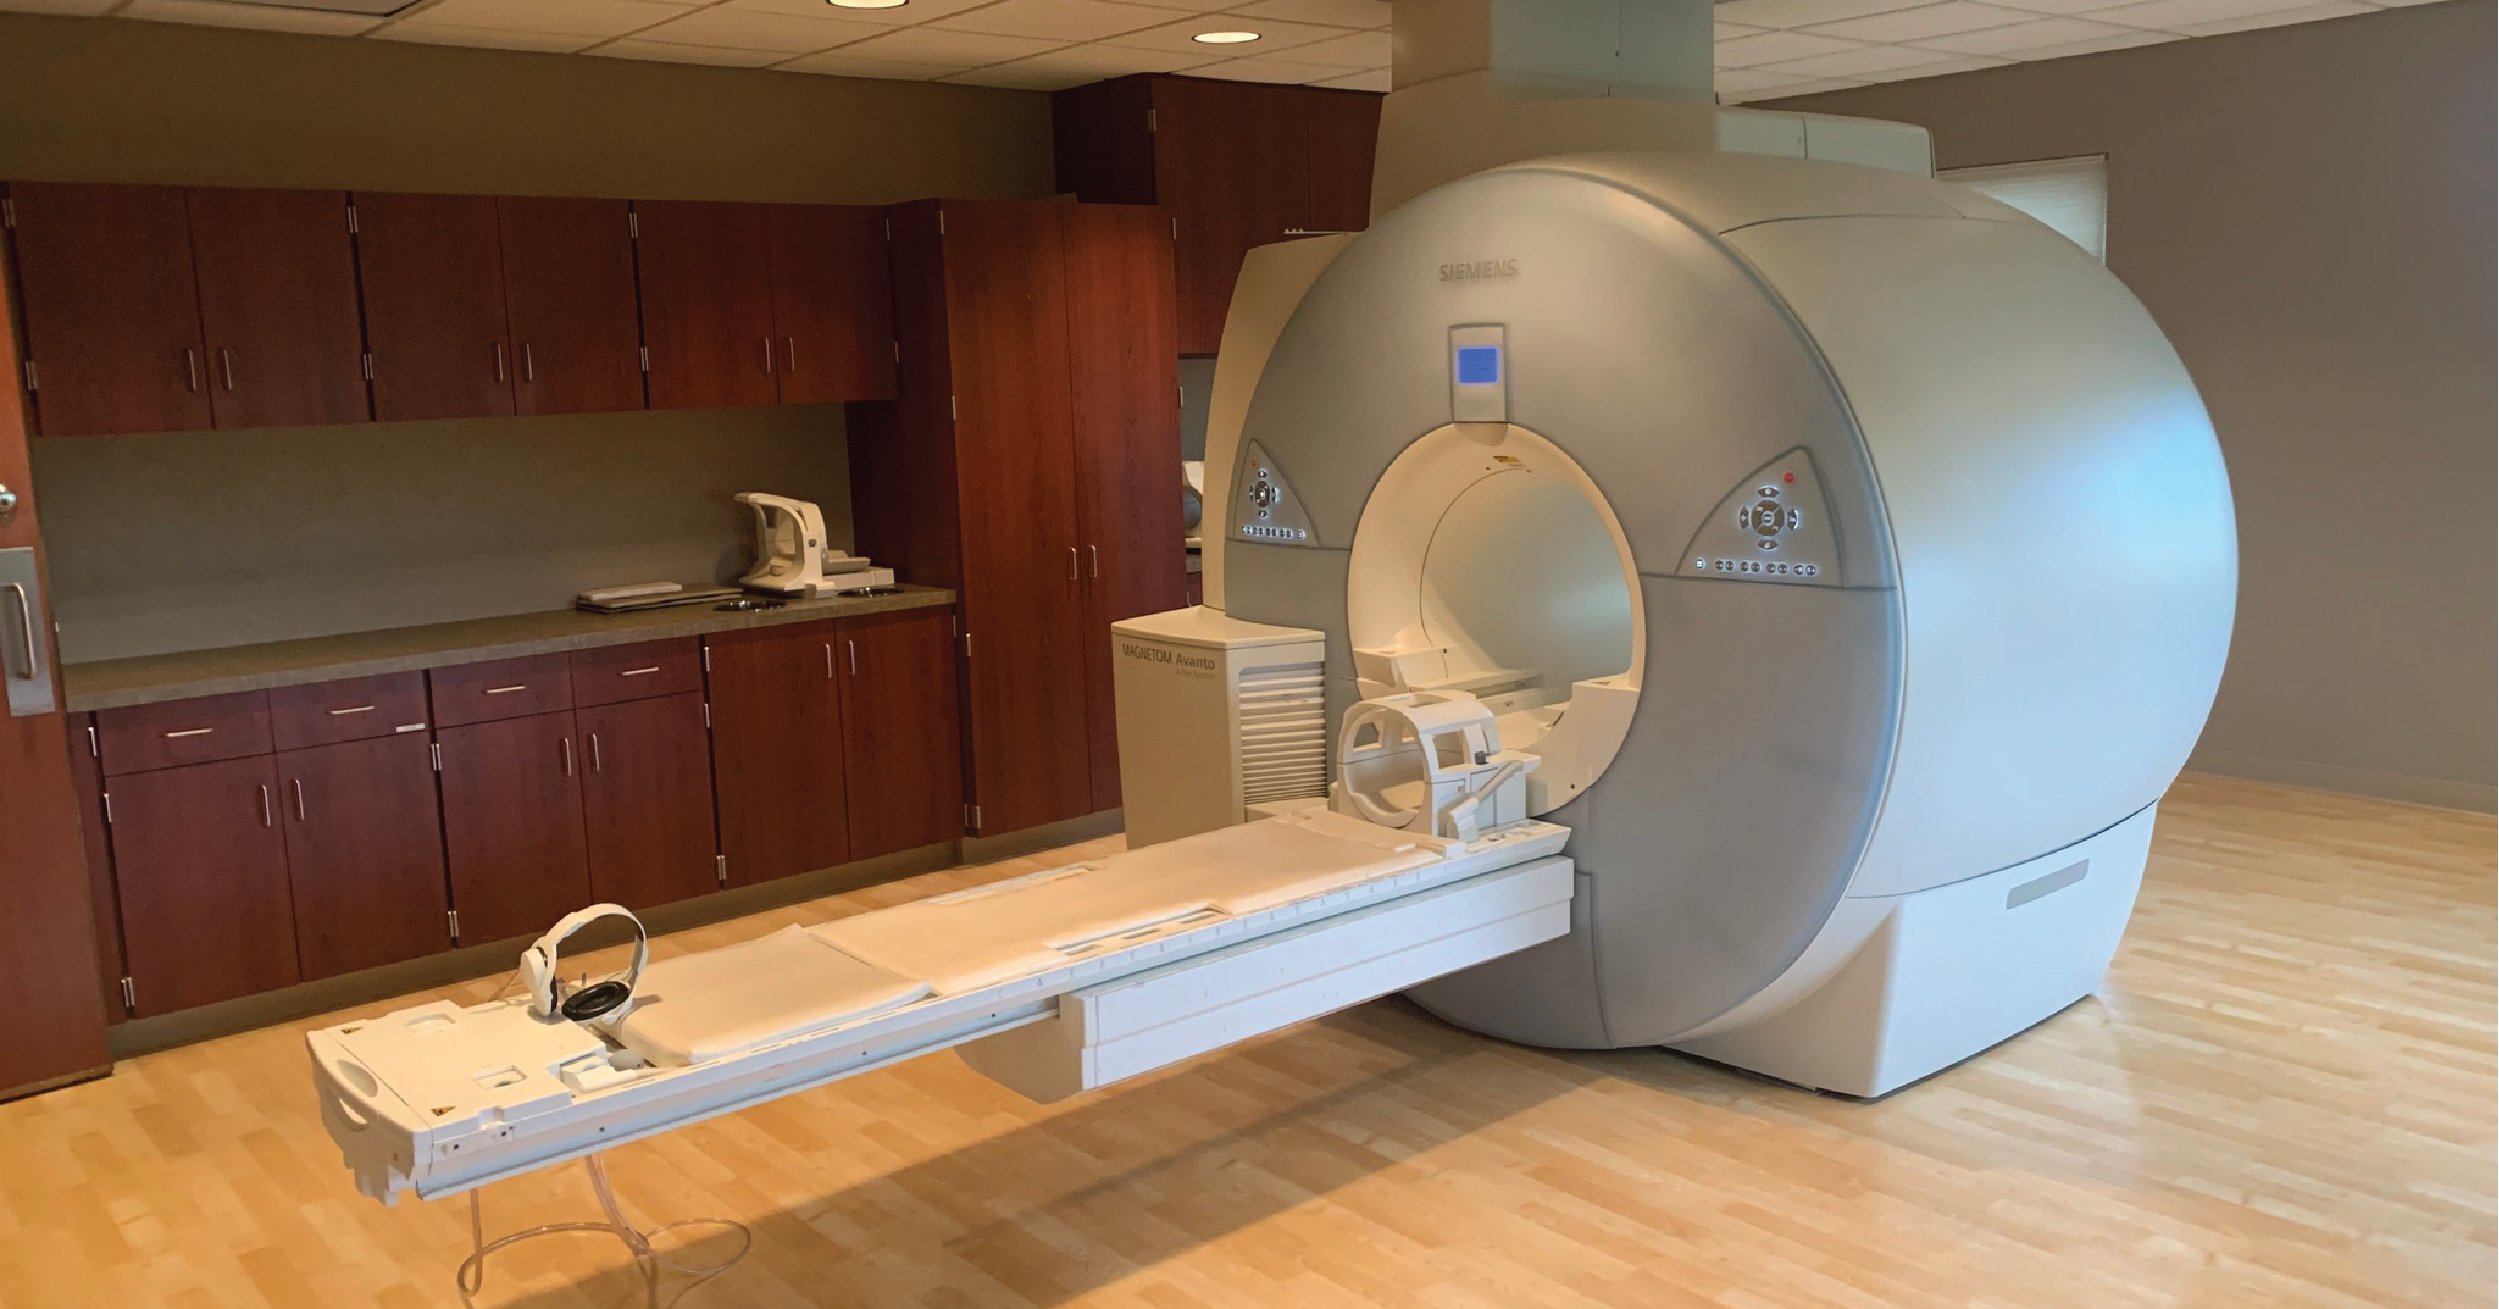 End of Life Medical Imaging Equipment... What Does It Really Mean?